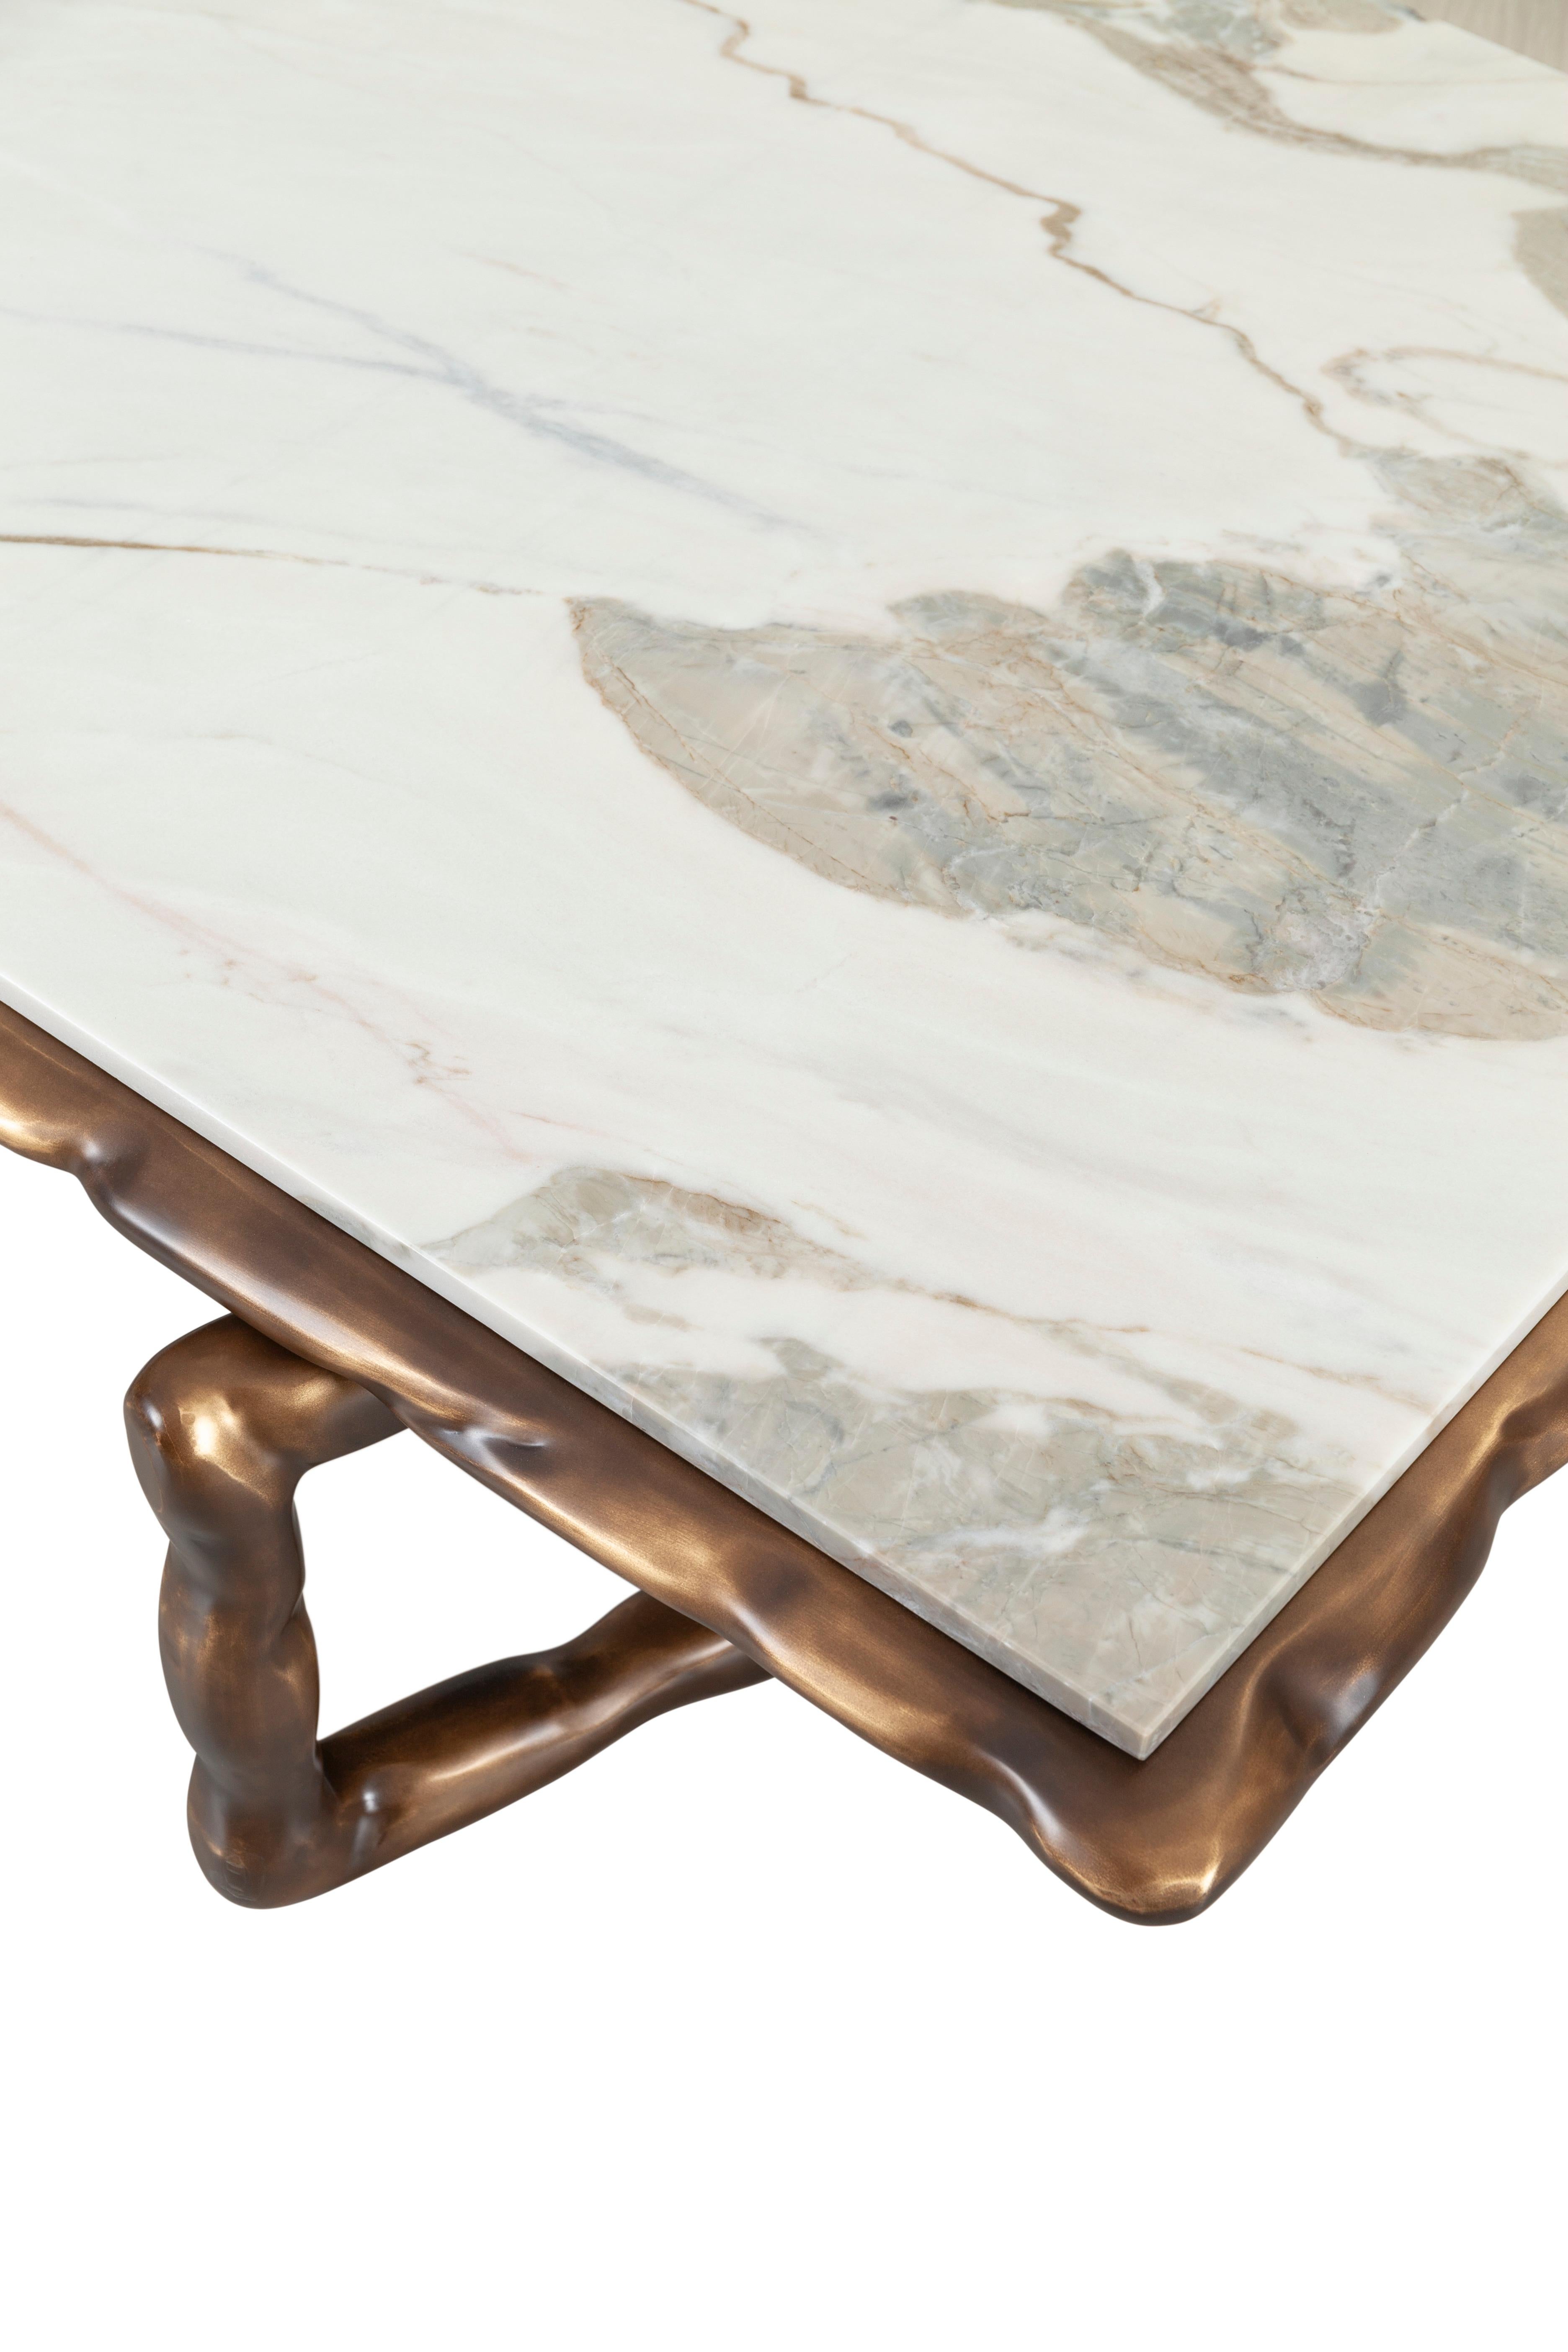 Contemporary Art Deco Stone Coffee Table Calacatta Marble Handmade in Portugal by Greenapple For Sale